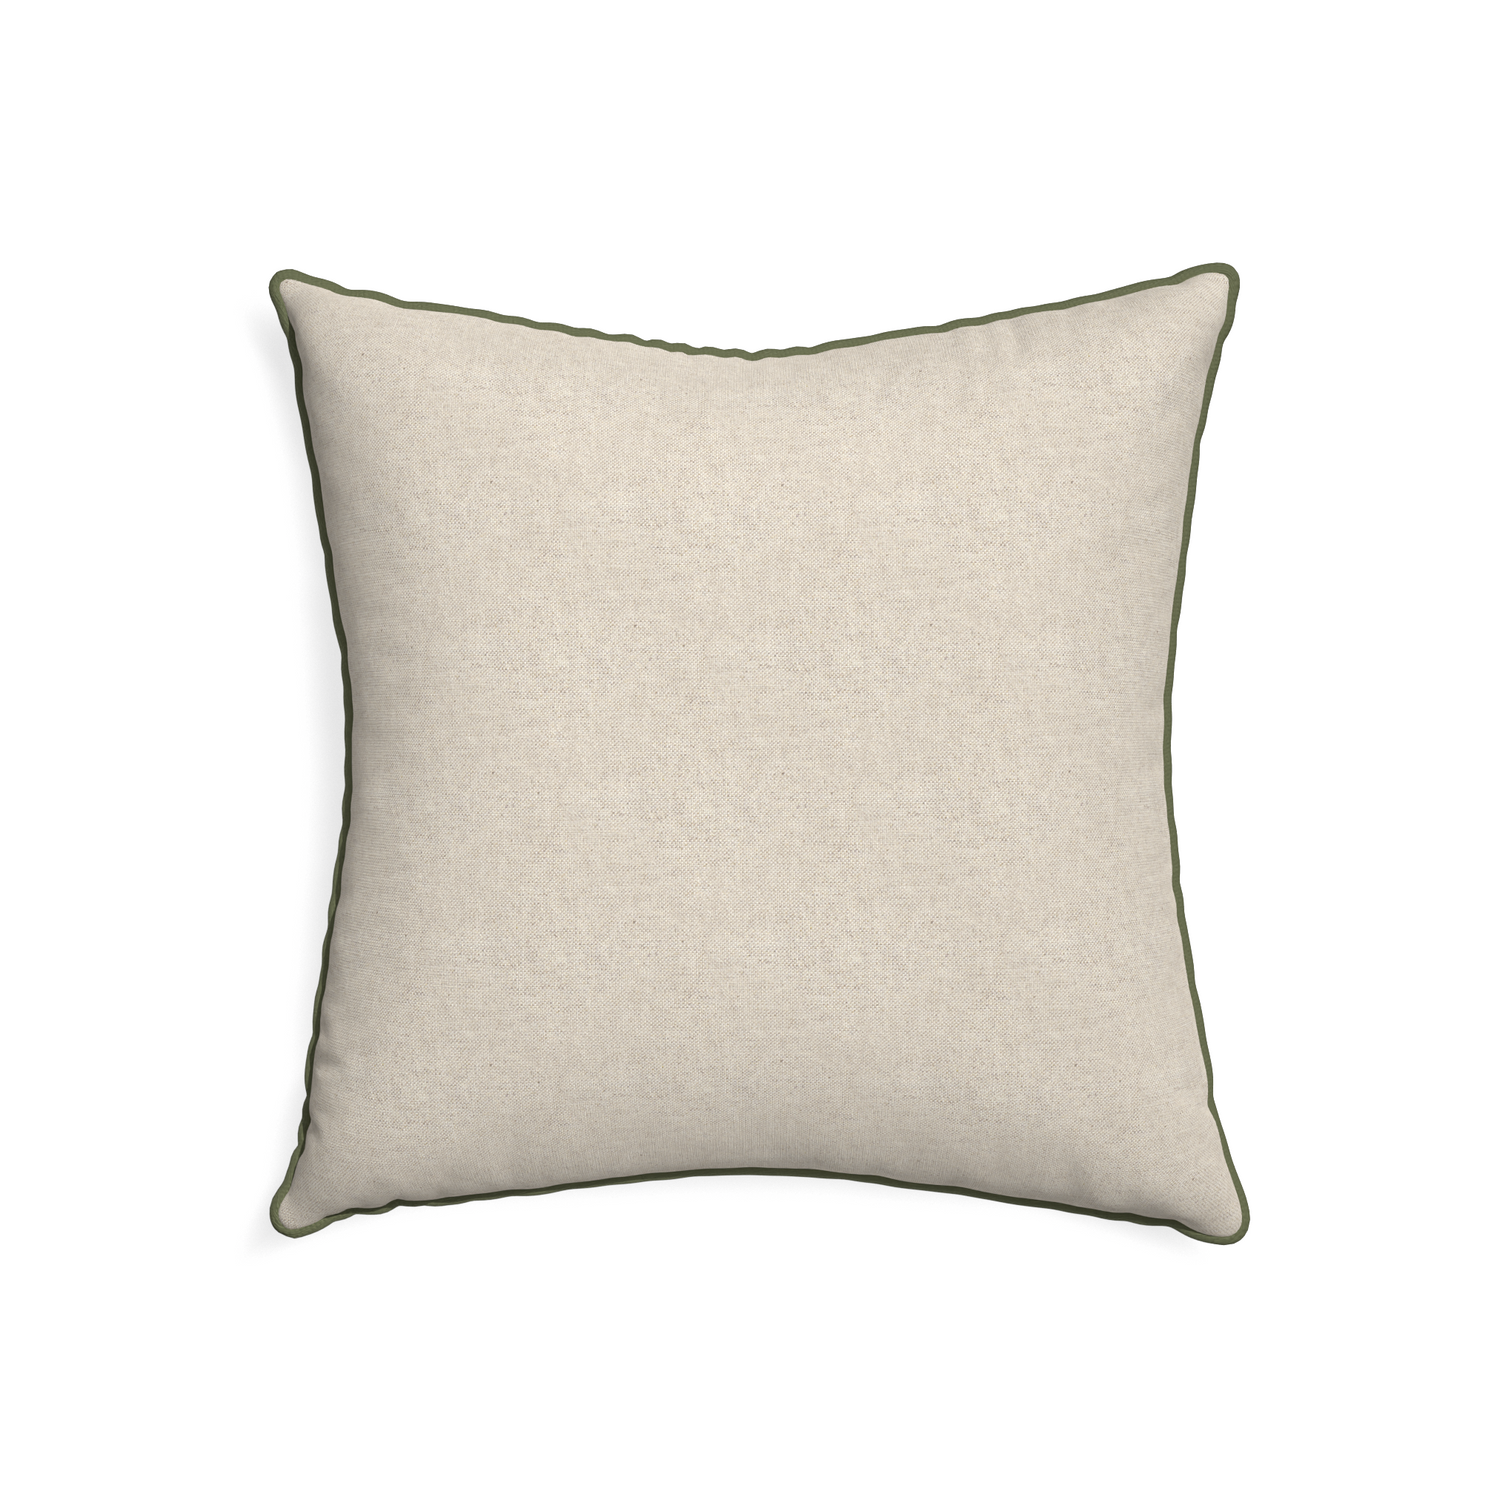 22-square oat custom light brownpillow with f piping on white background